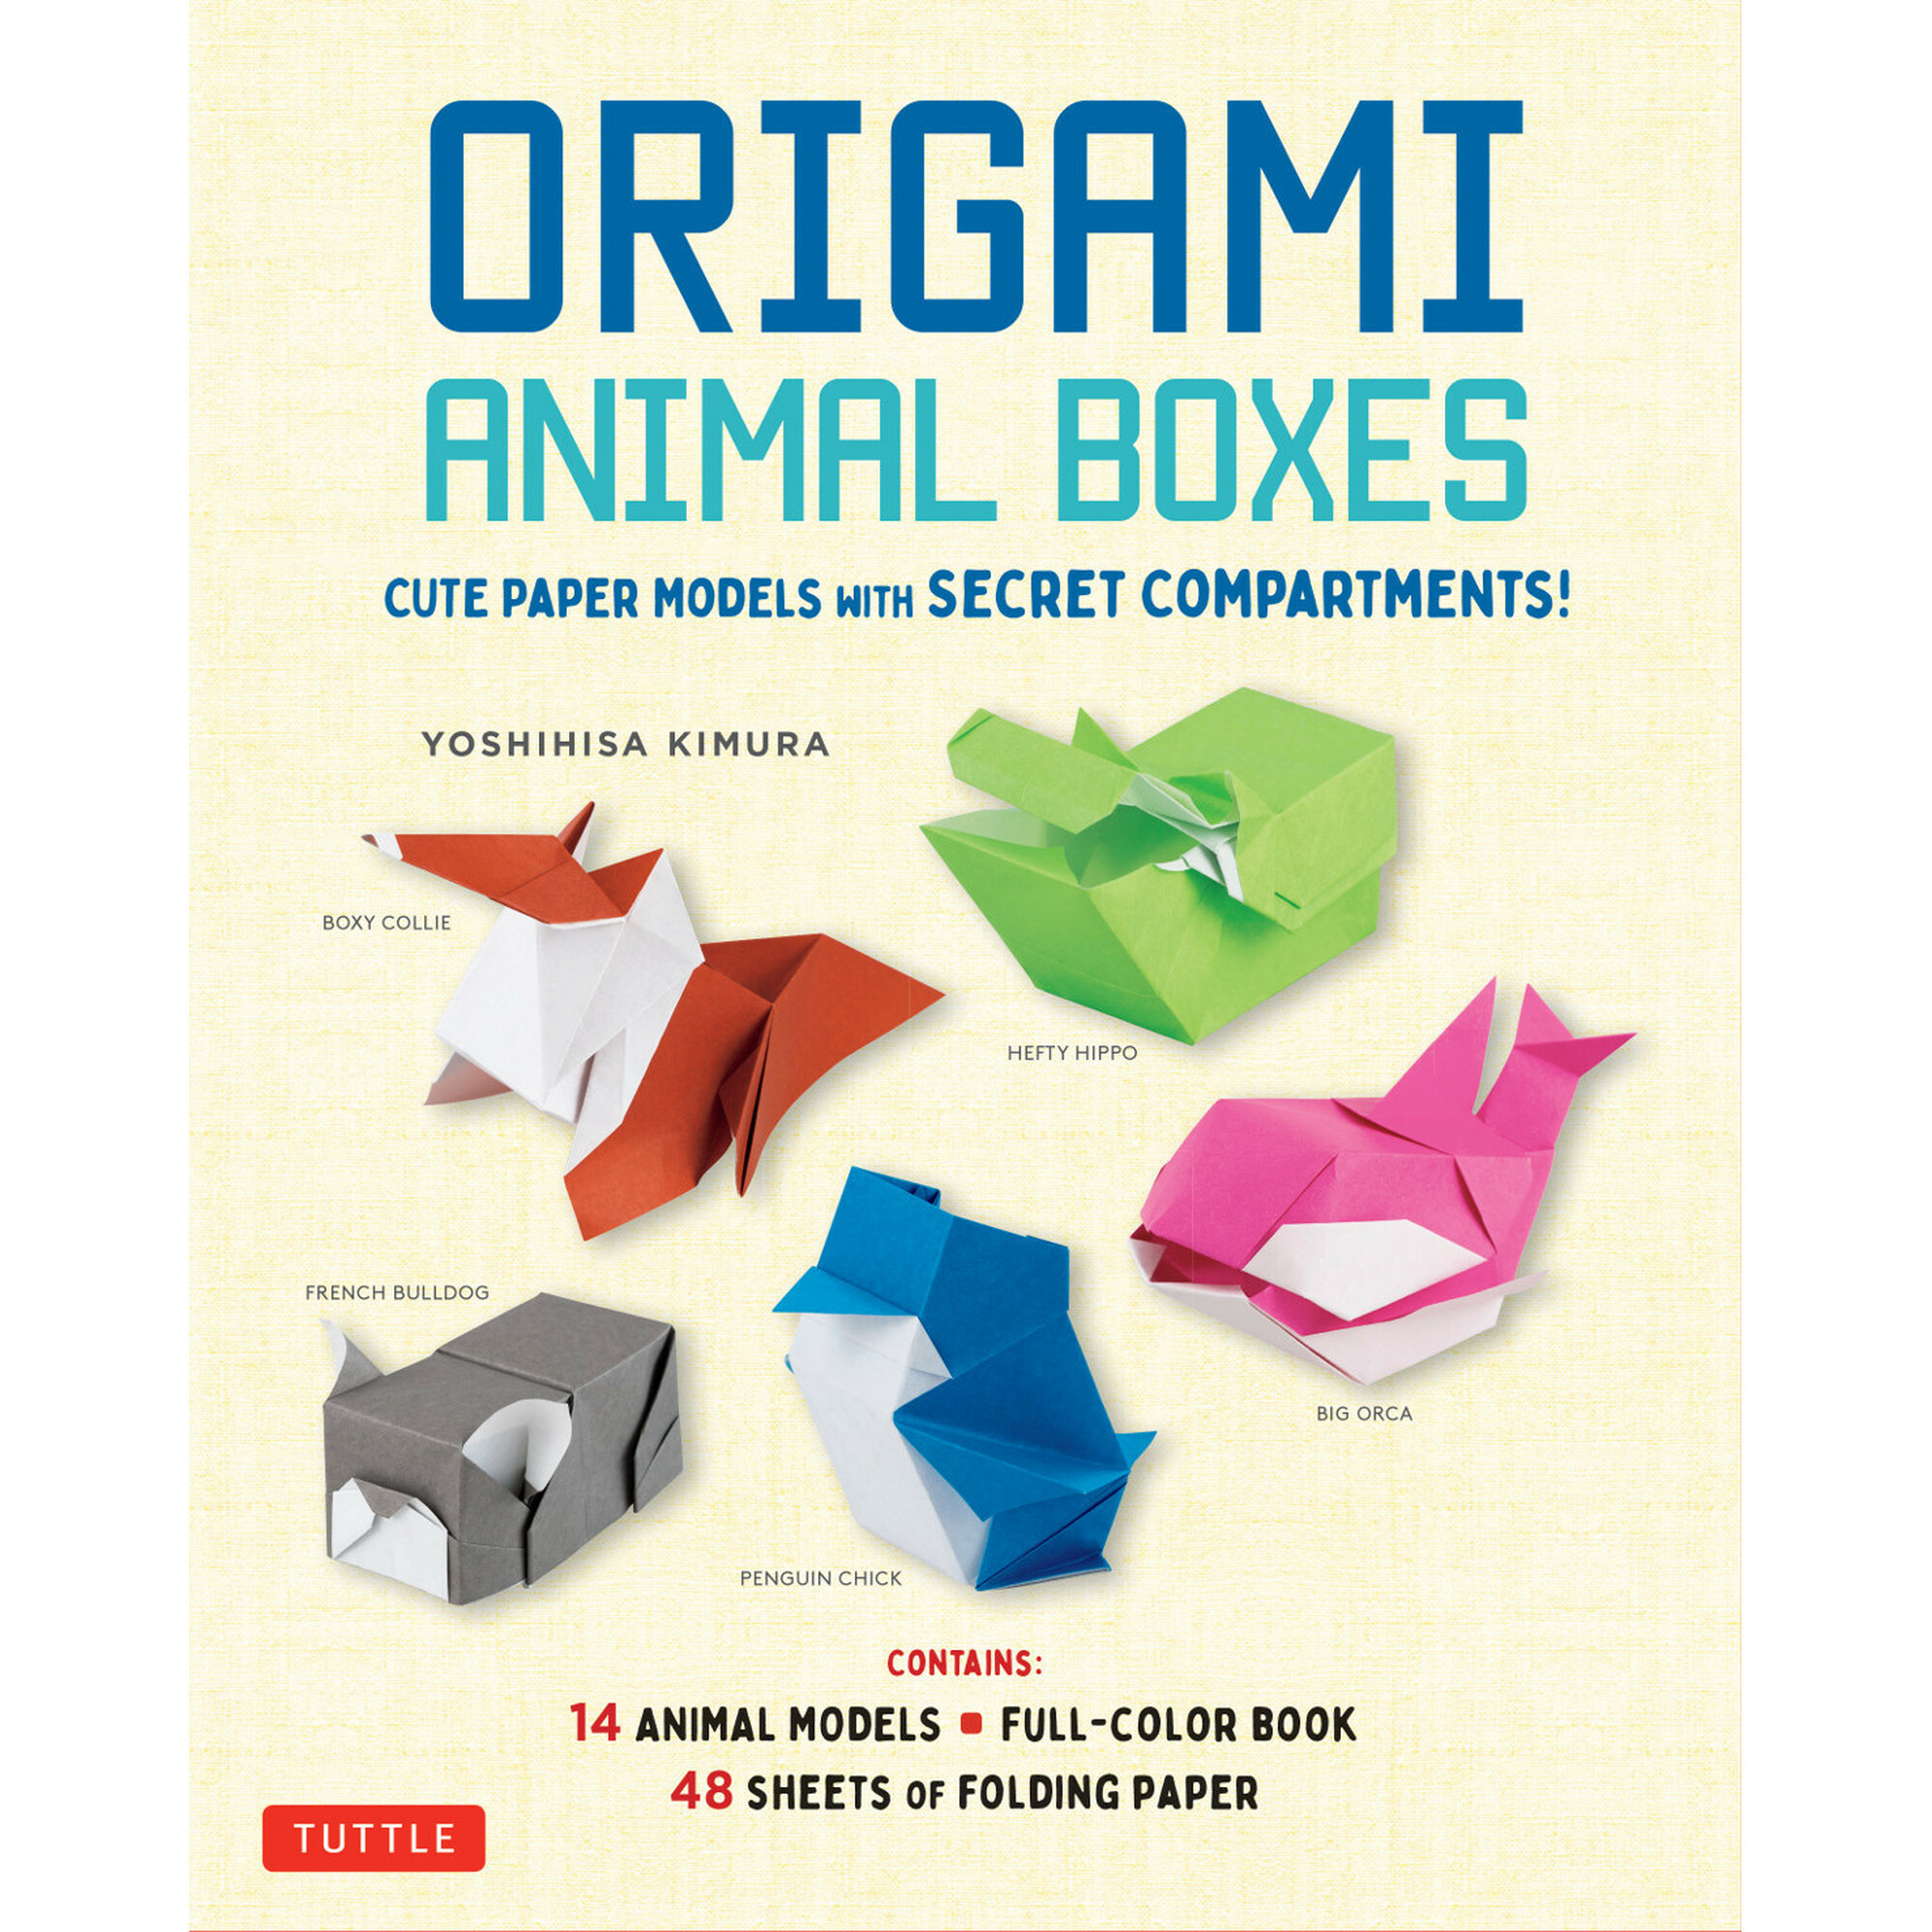 Origami Animal Boxes Kit - New with defect